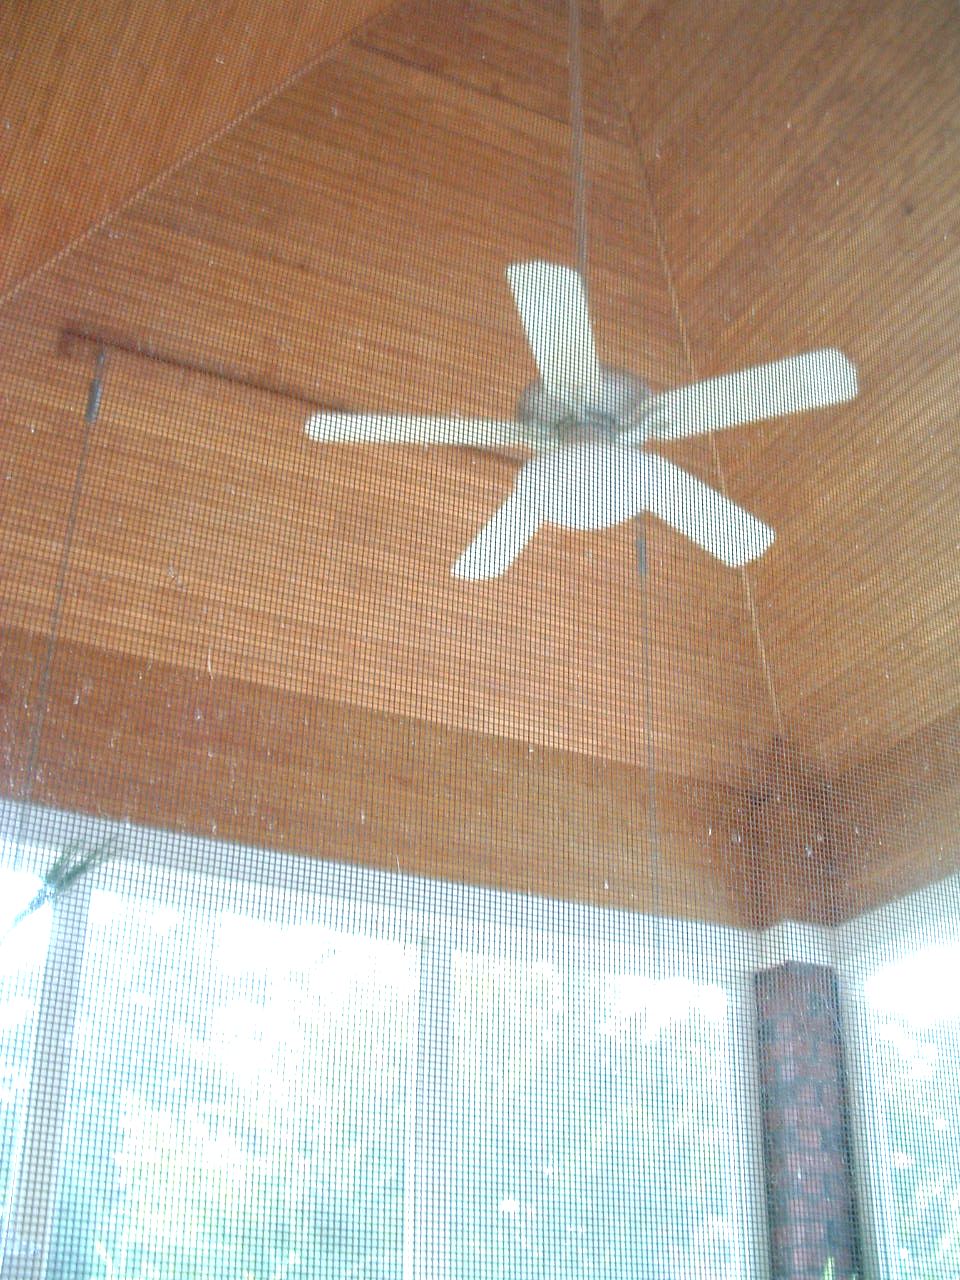 Screened Porch Ceiling